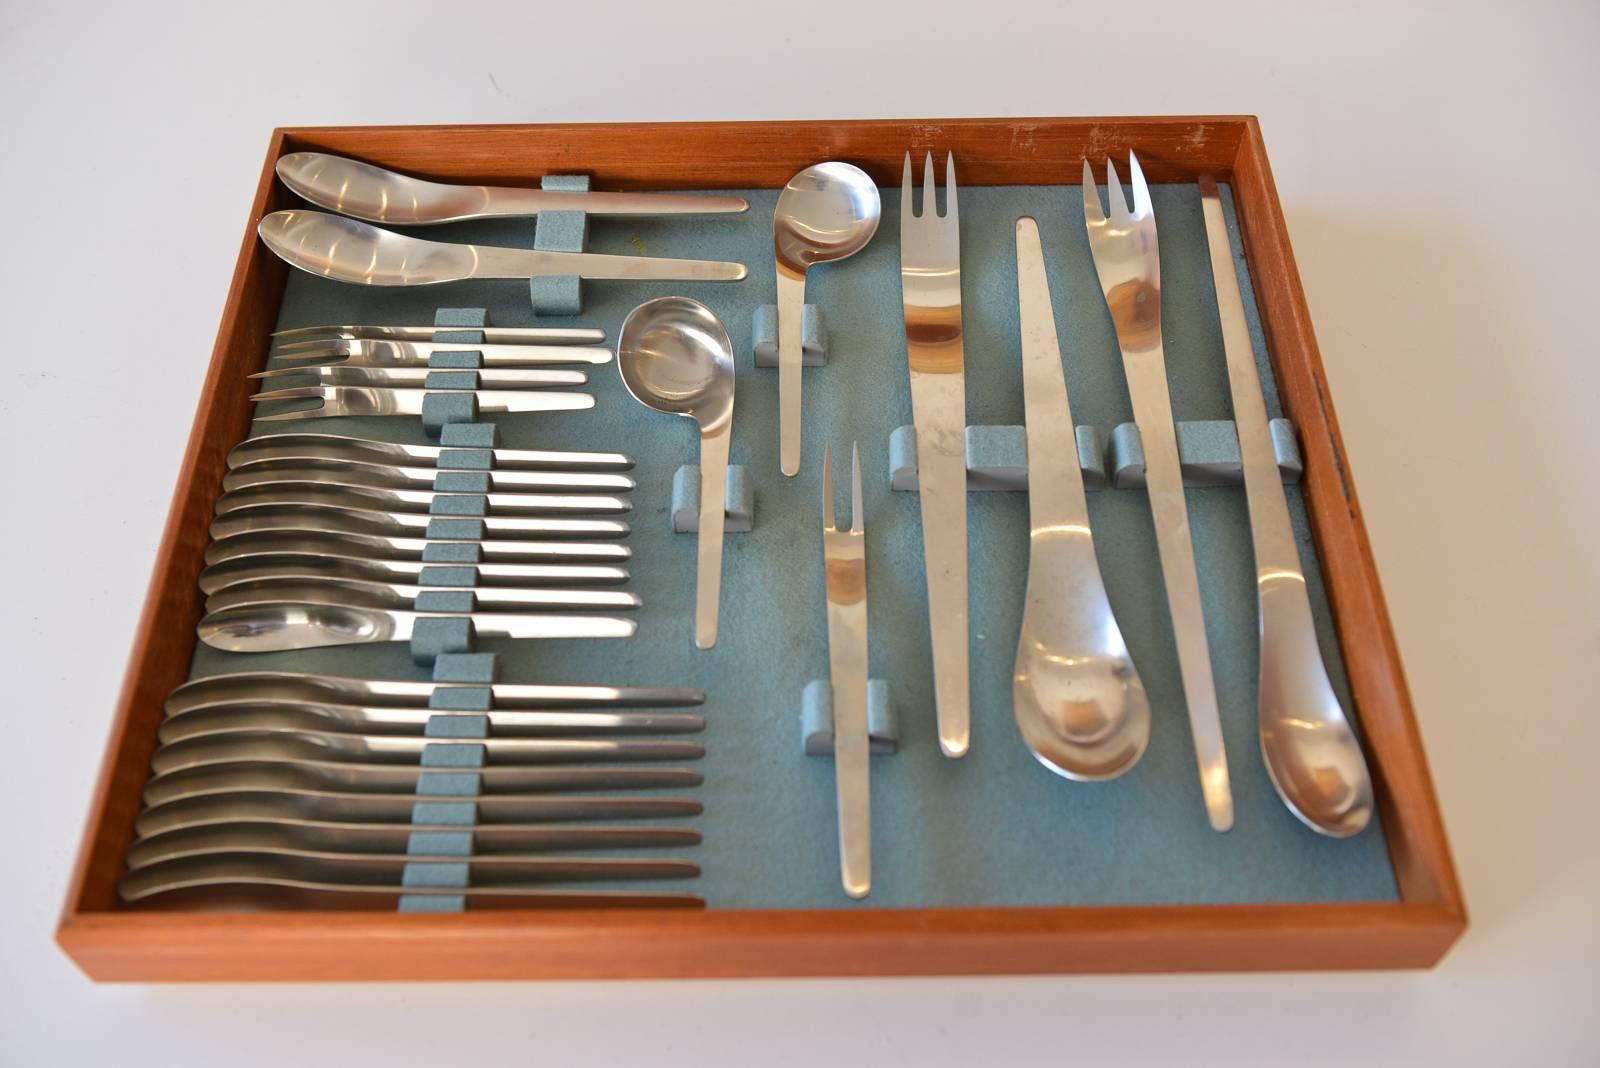 Early 77-piece. Set of Arne Jacobsen for A. Michelsen flatware, 1969. Stainless steel, with markings. Very good to excellent condition. 

Complete canteen service for eight includes:
Eight each of the following:
Dinner fork
Knife
Salad fork
Teaspoon